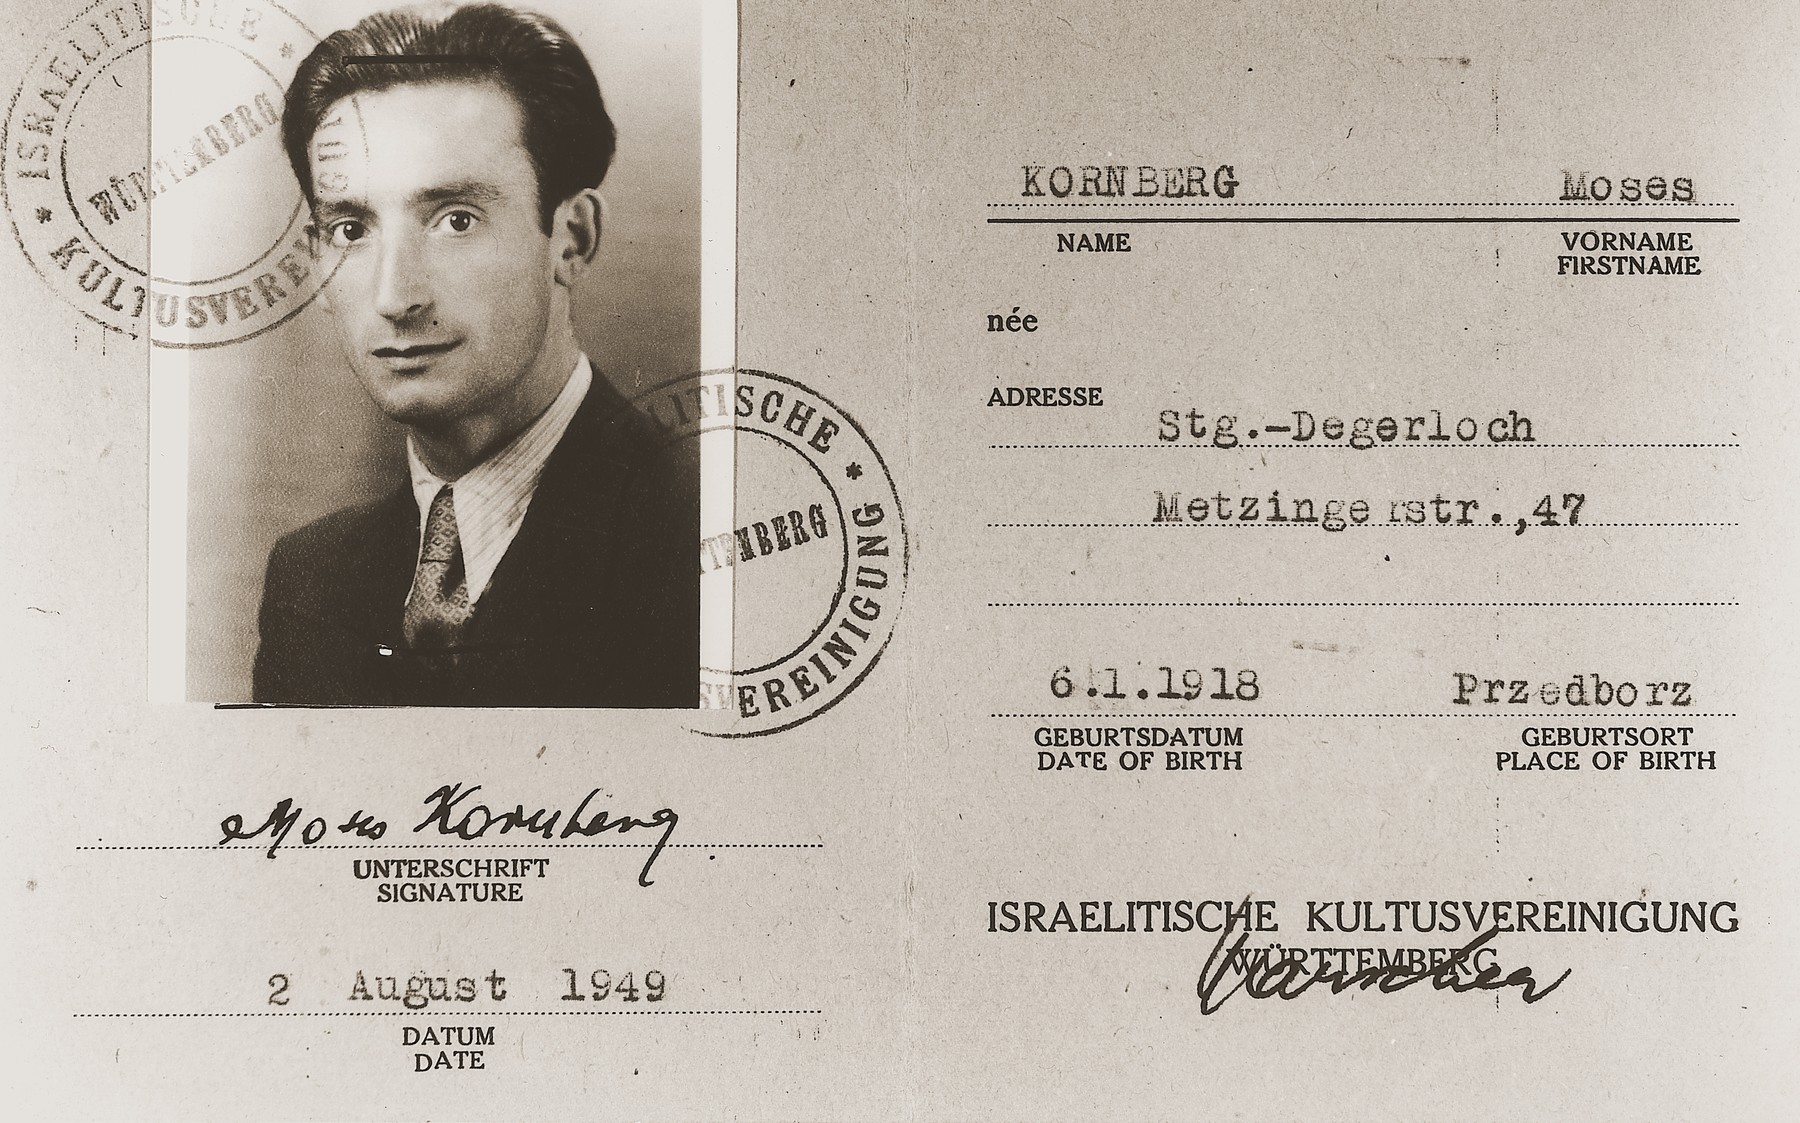 Identification papers for Moses Kornberg issued by the Jewish community of Wuerttemberg in Stuttgart.